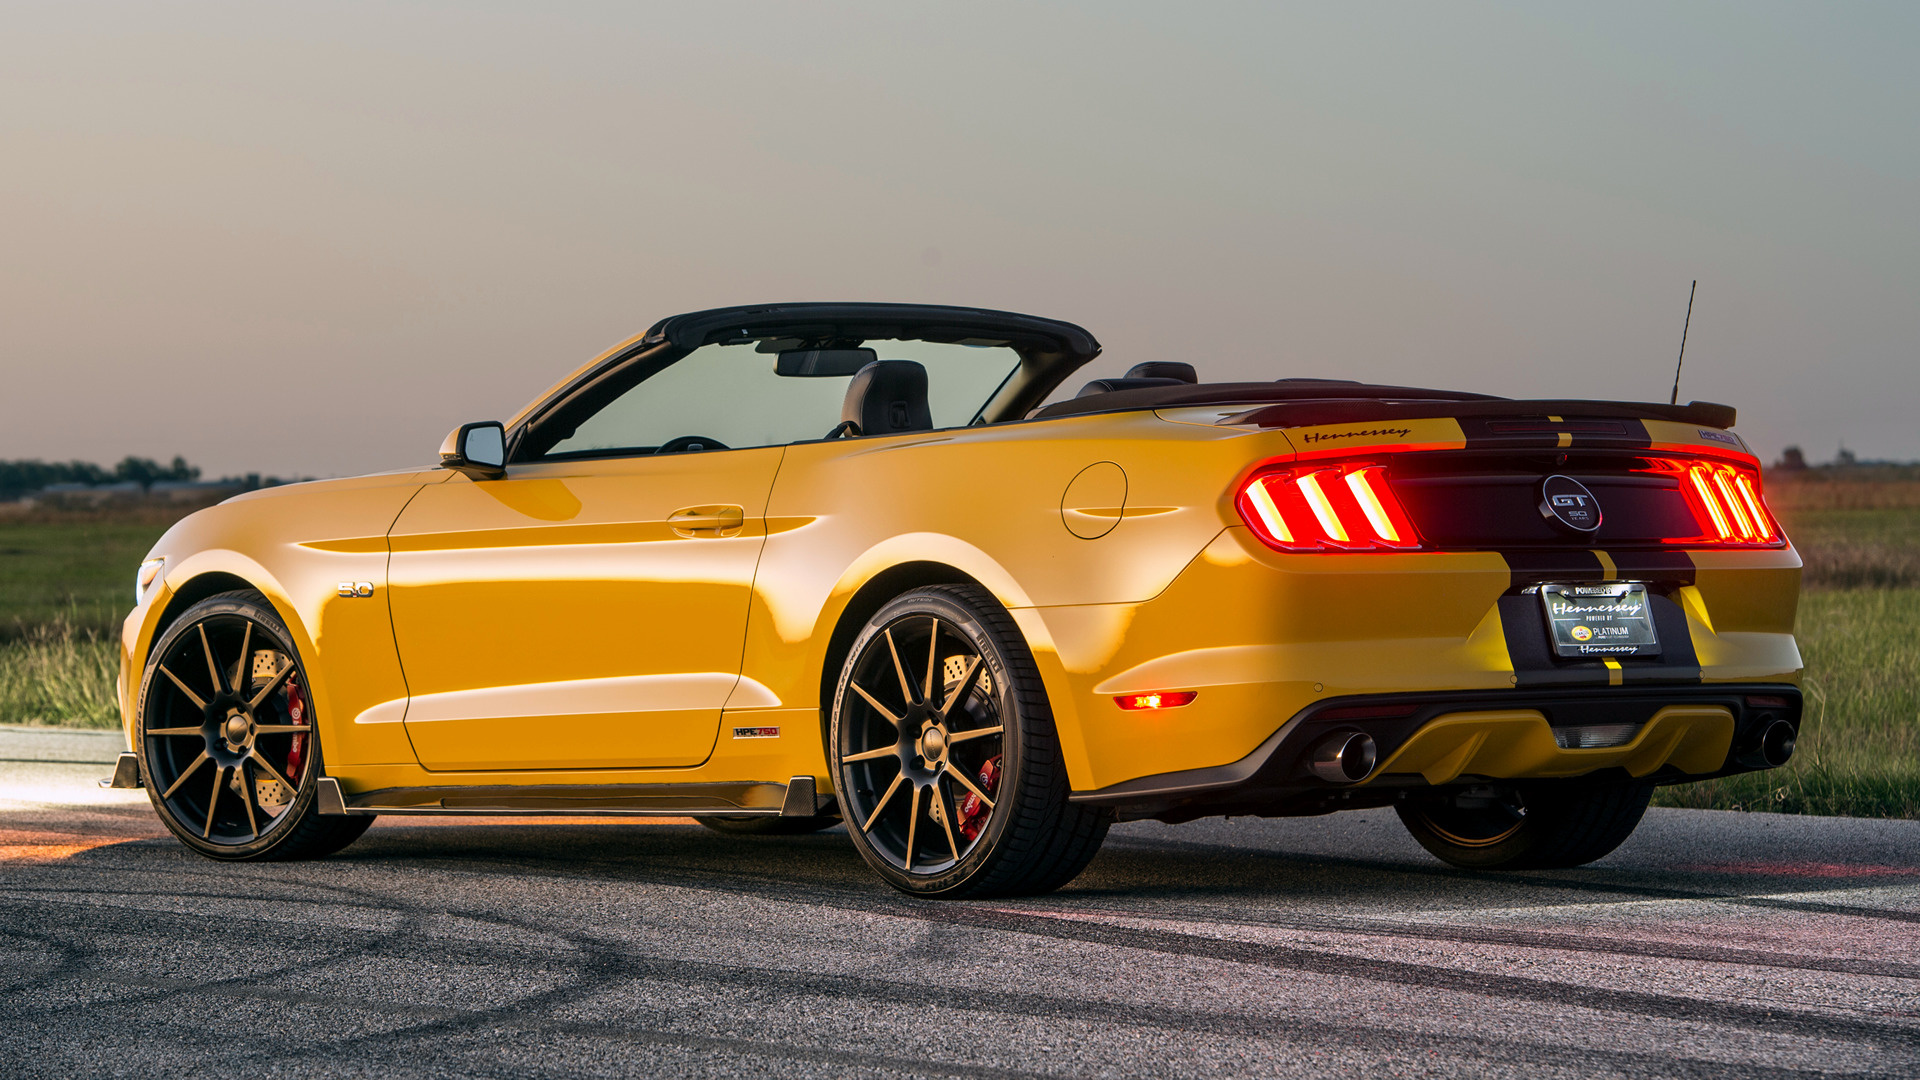 Download mobile wallpaper Tuning, Car, Convertible, Muscle Car, Vehicles, Yellow Car, Hennessey Mustang Gt for free.